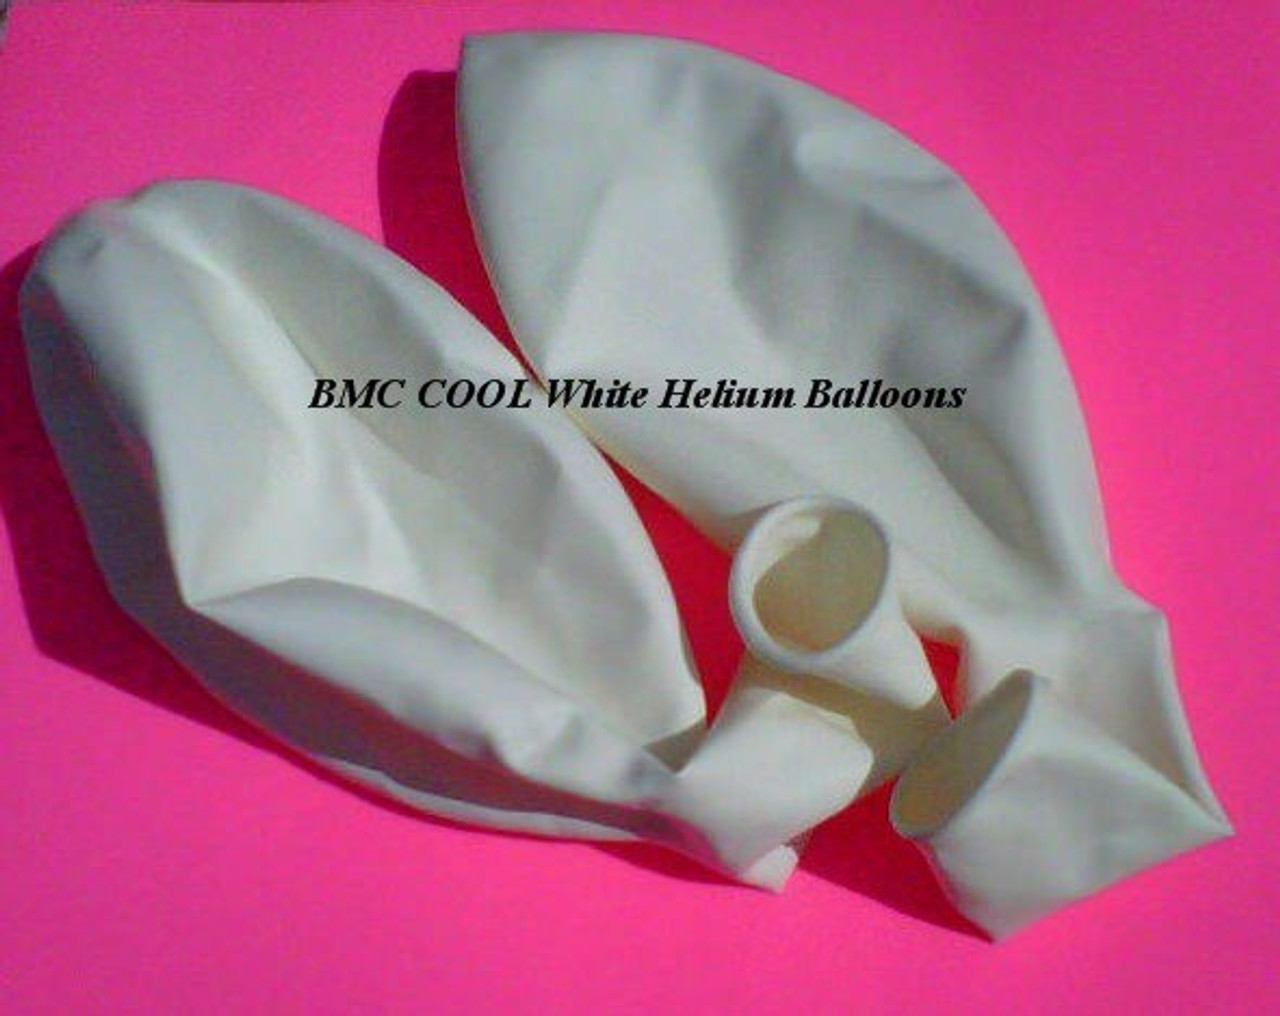 40 Inch White Helium Balloons for kite Fishing - Cool White Color